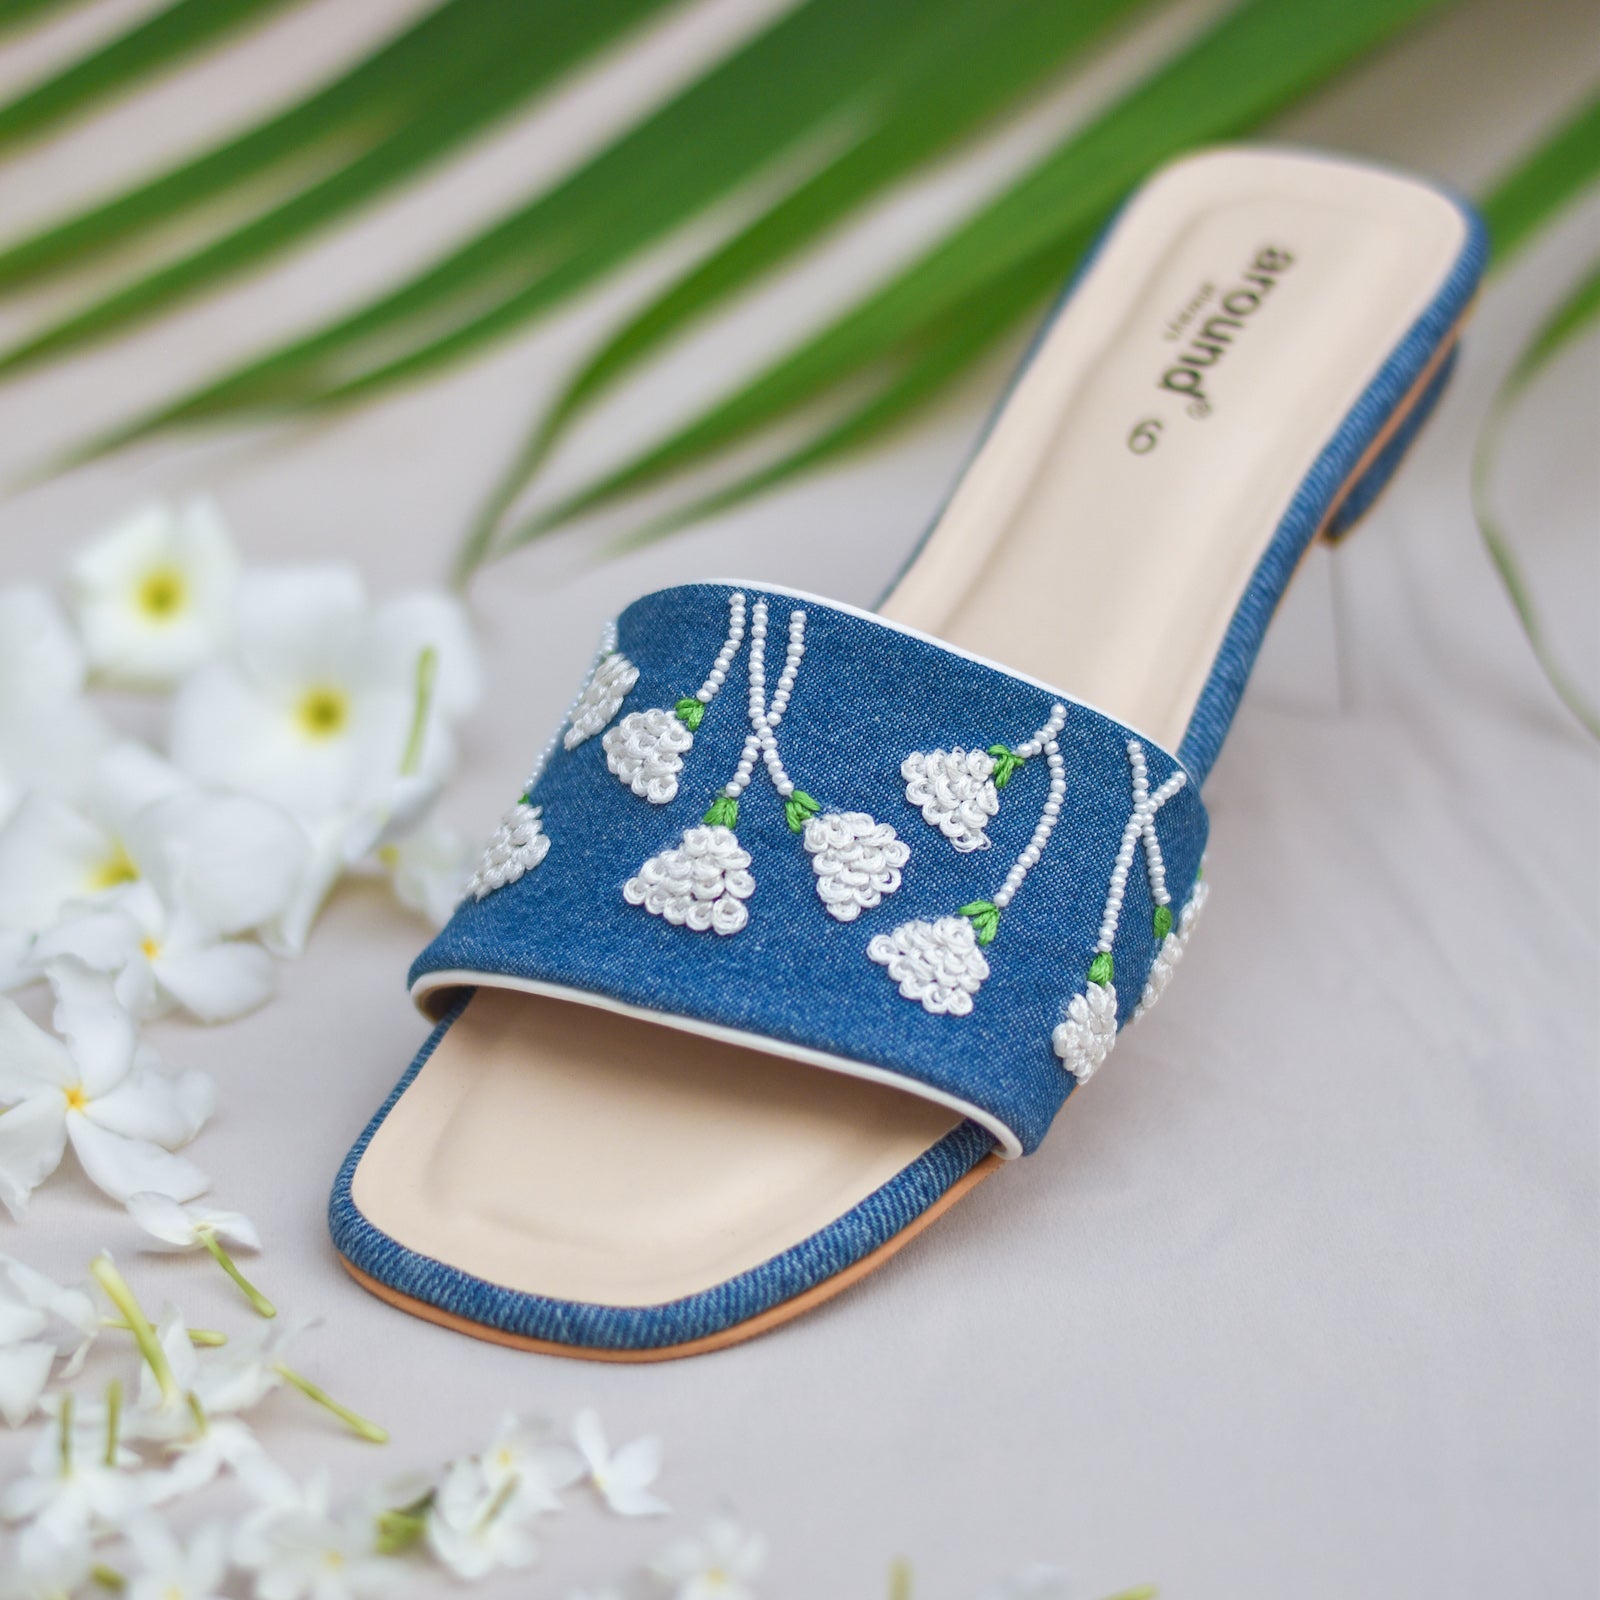 Hand embroidered denim slipons for girls with white embroidery